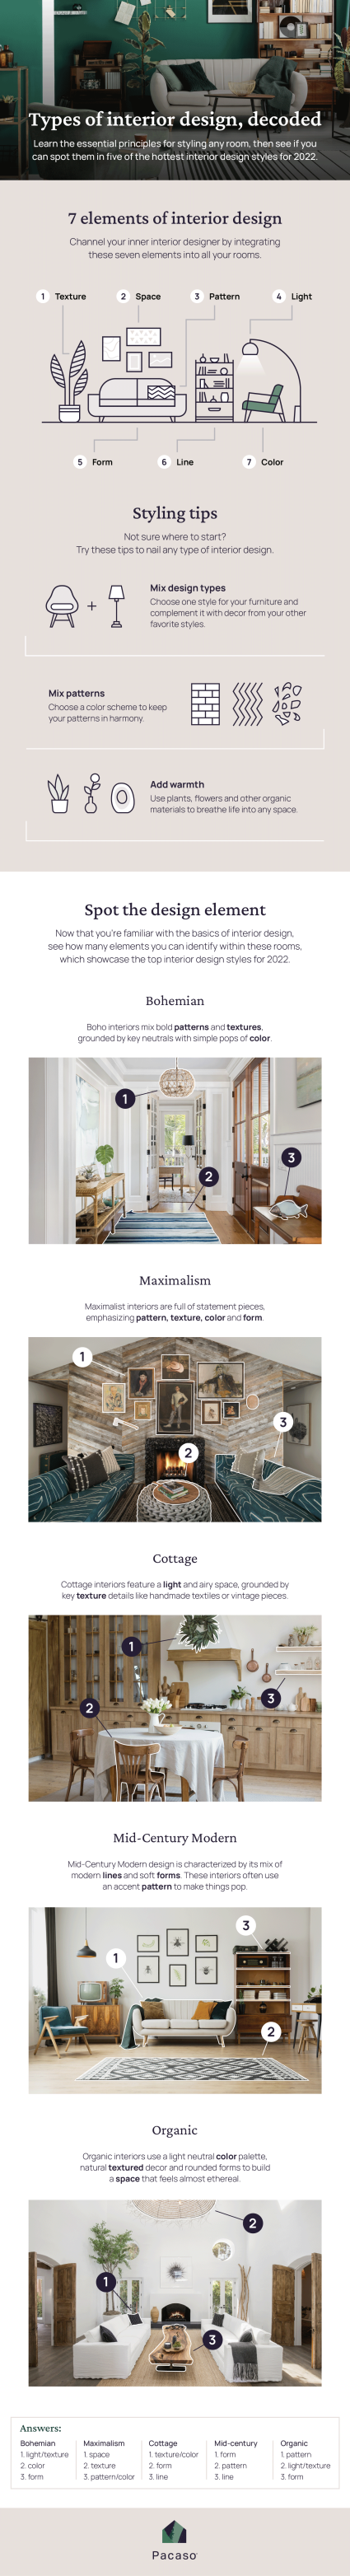 An infographic describes the seven interior design types, styling tips and has a game based on trending types of interior design.